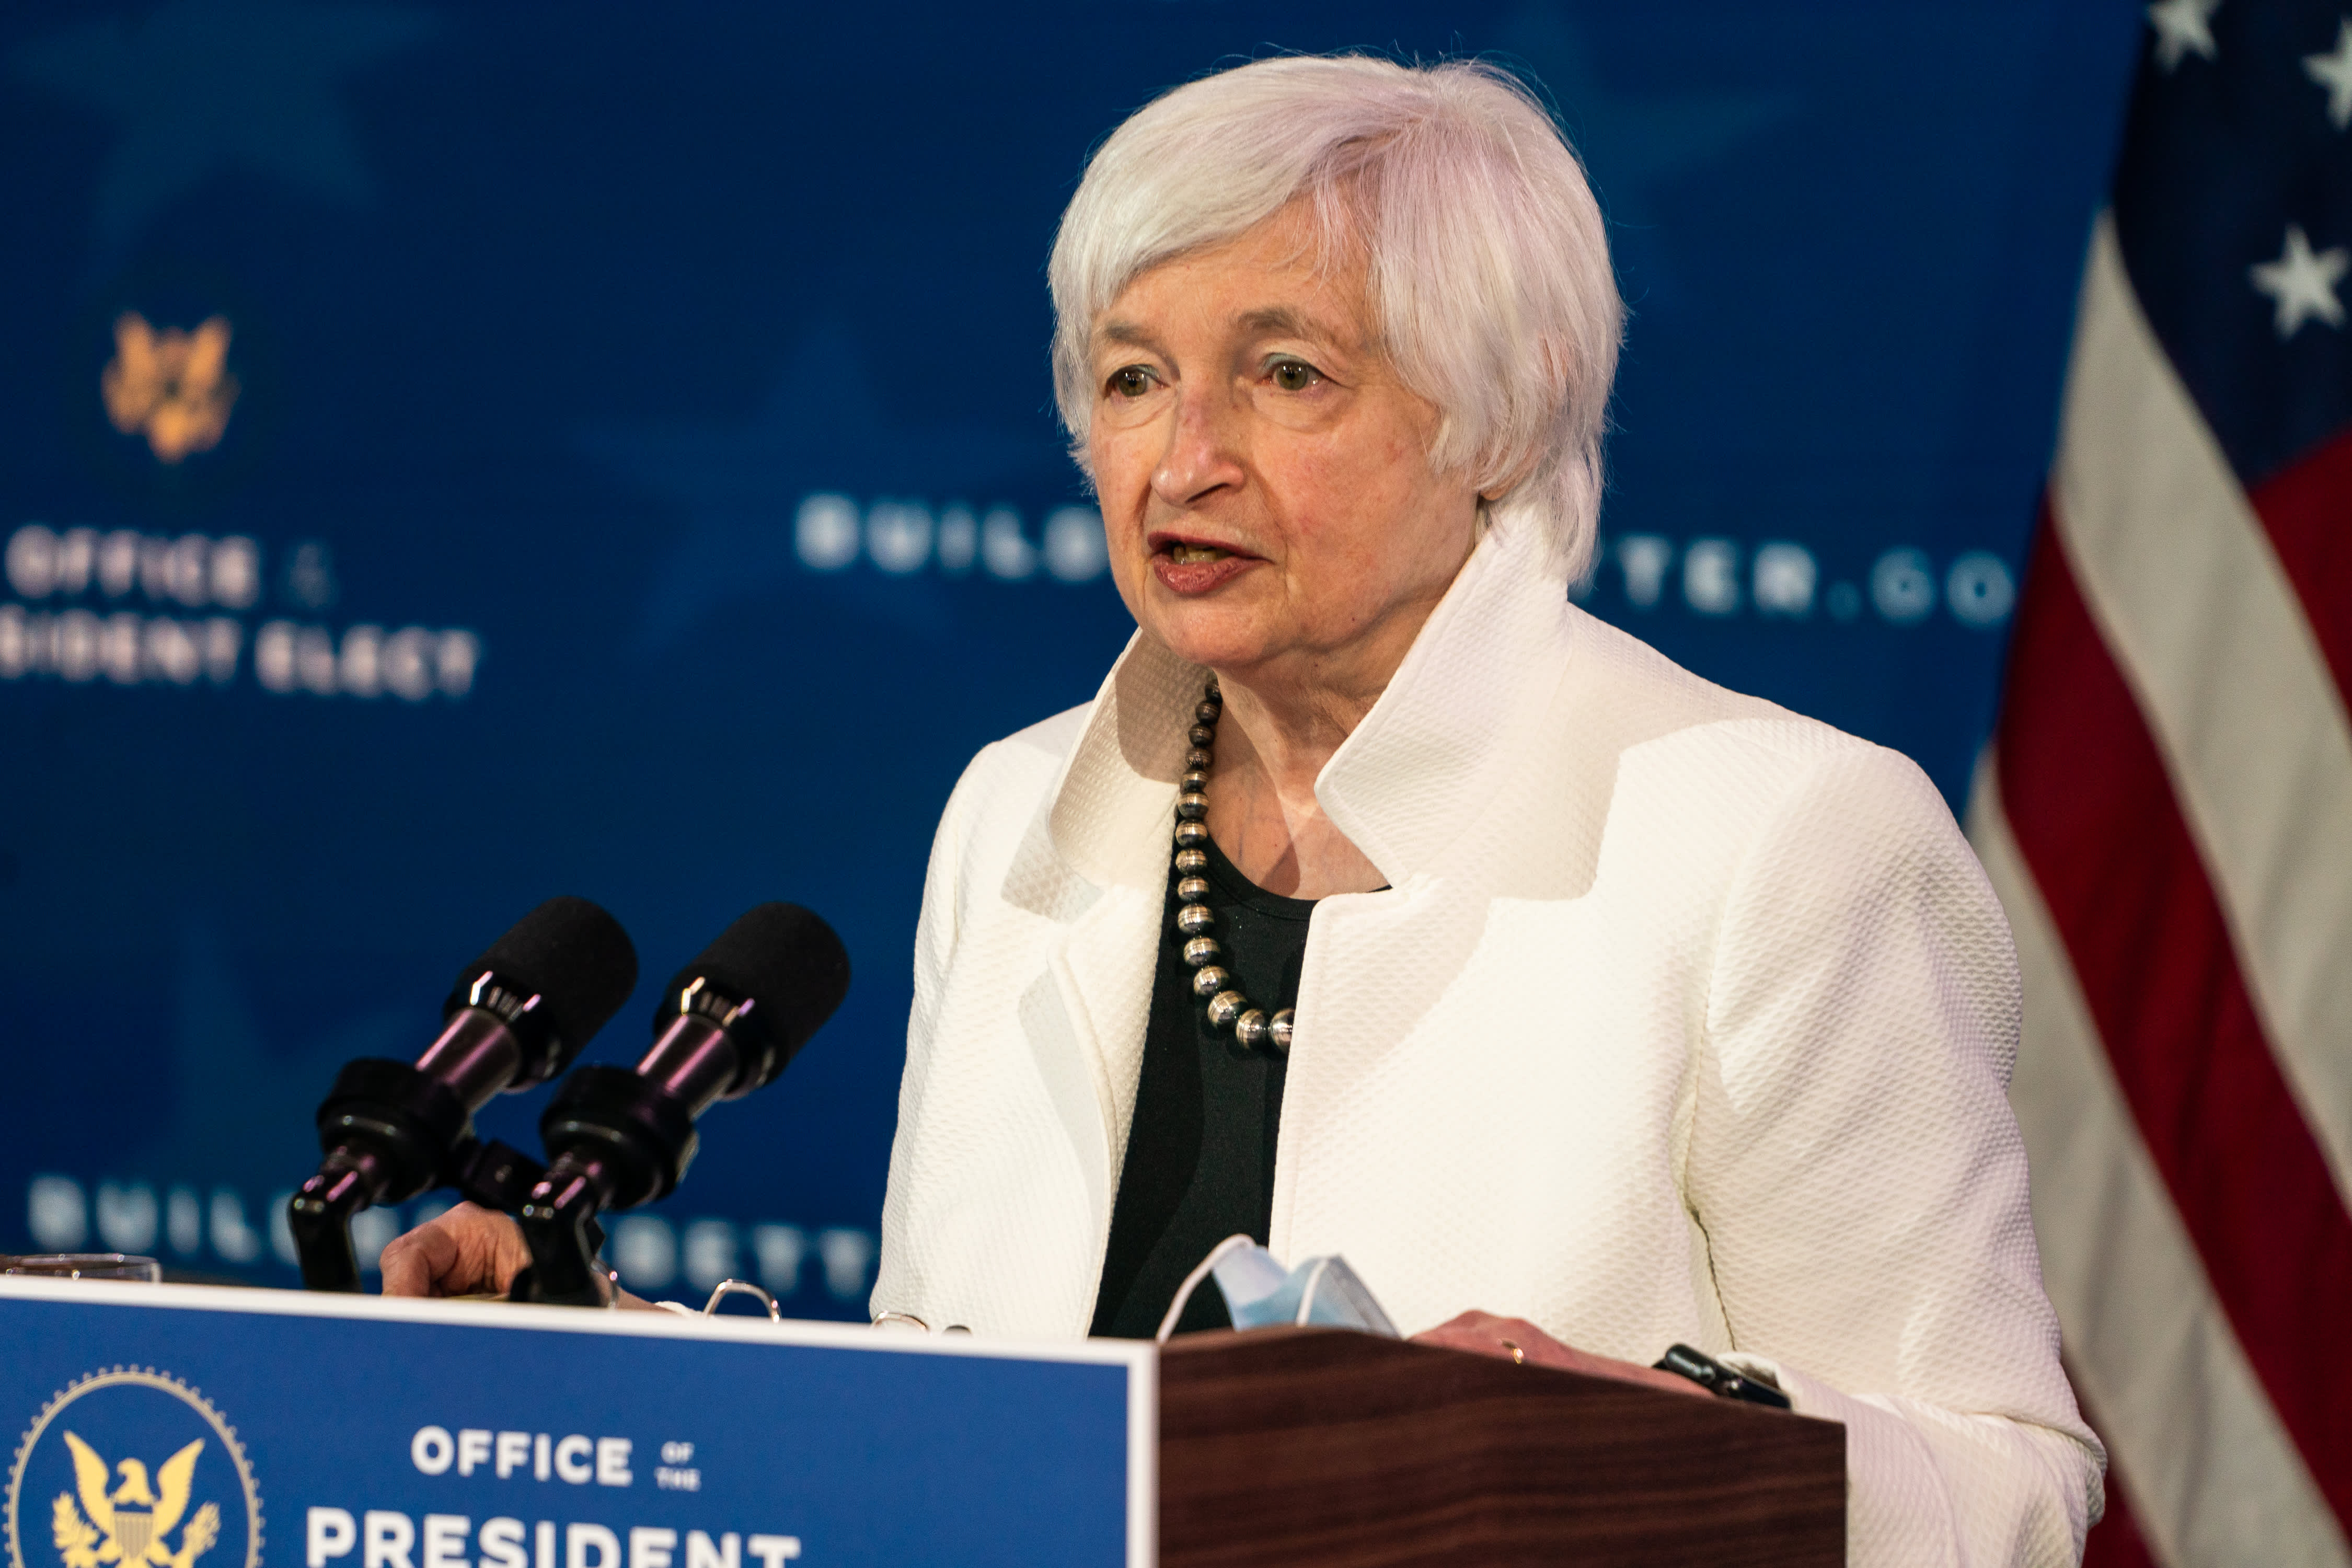 Janet Yellen sees post-Covid growth, possible full employment in 2022